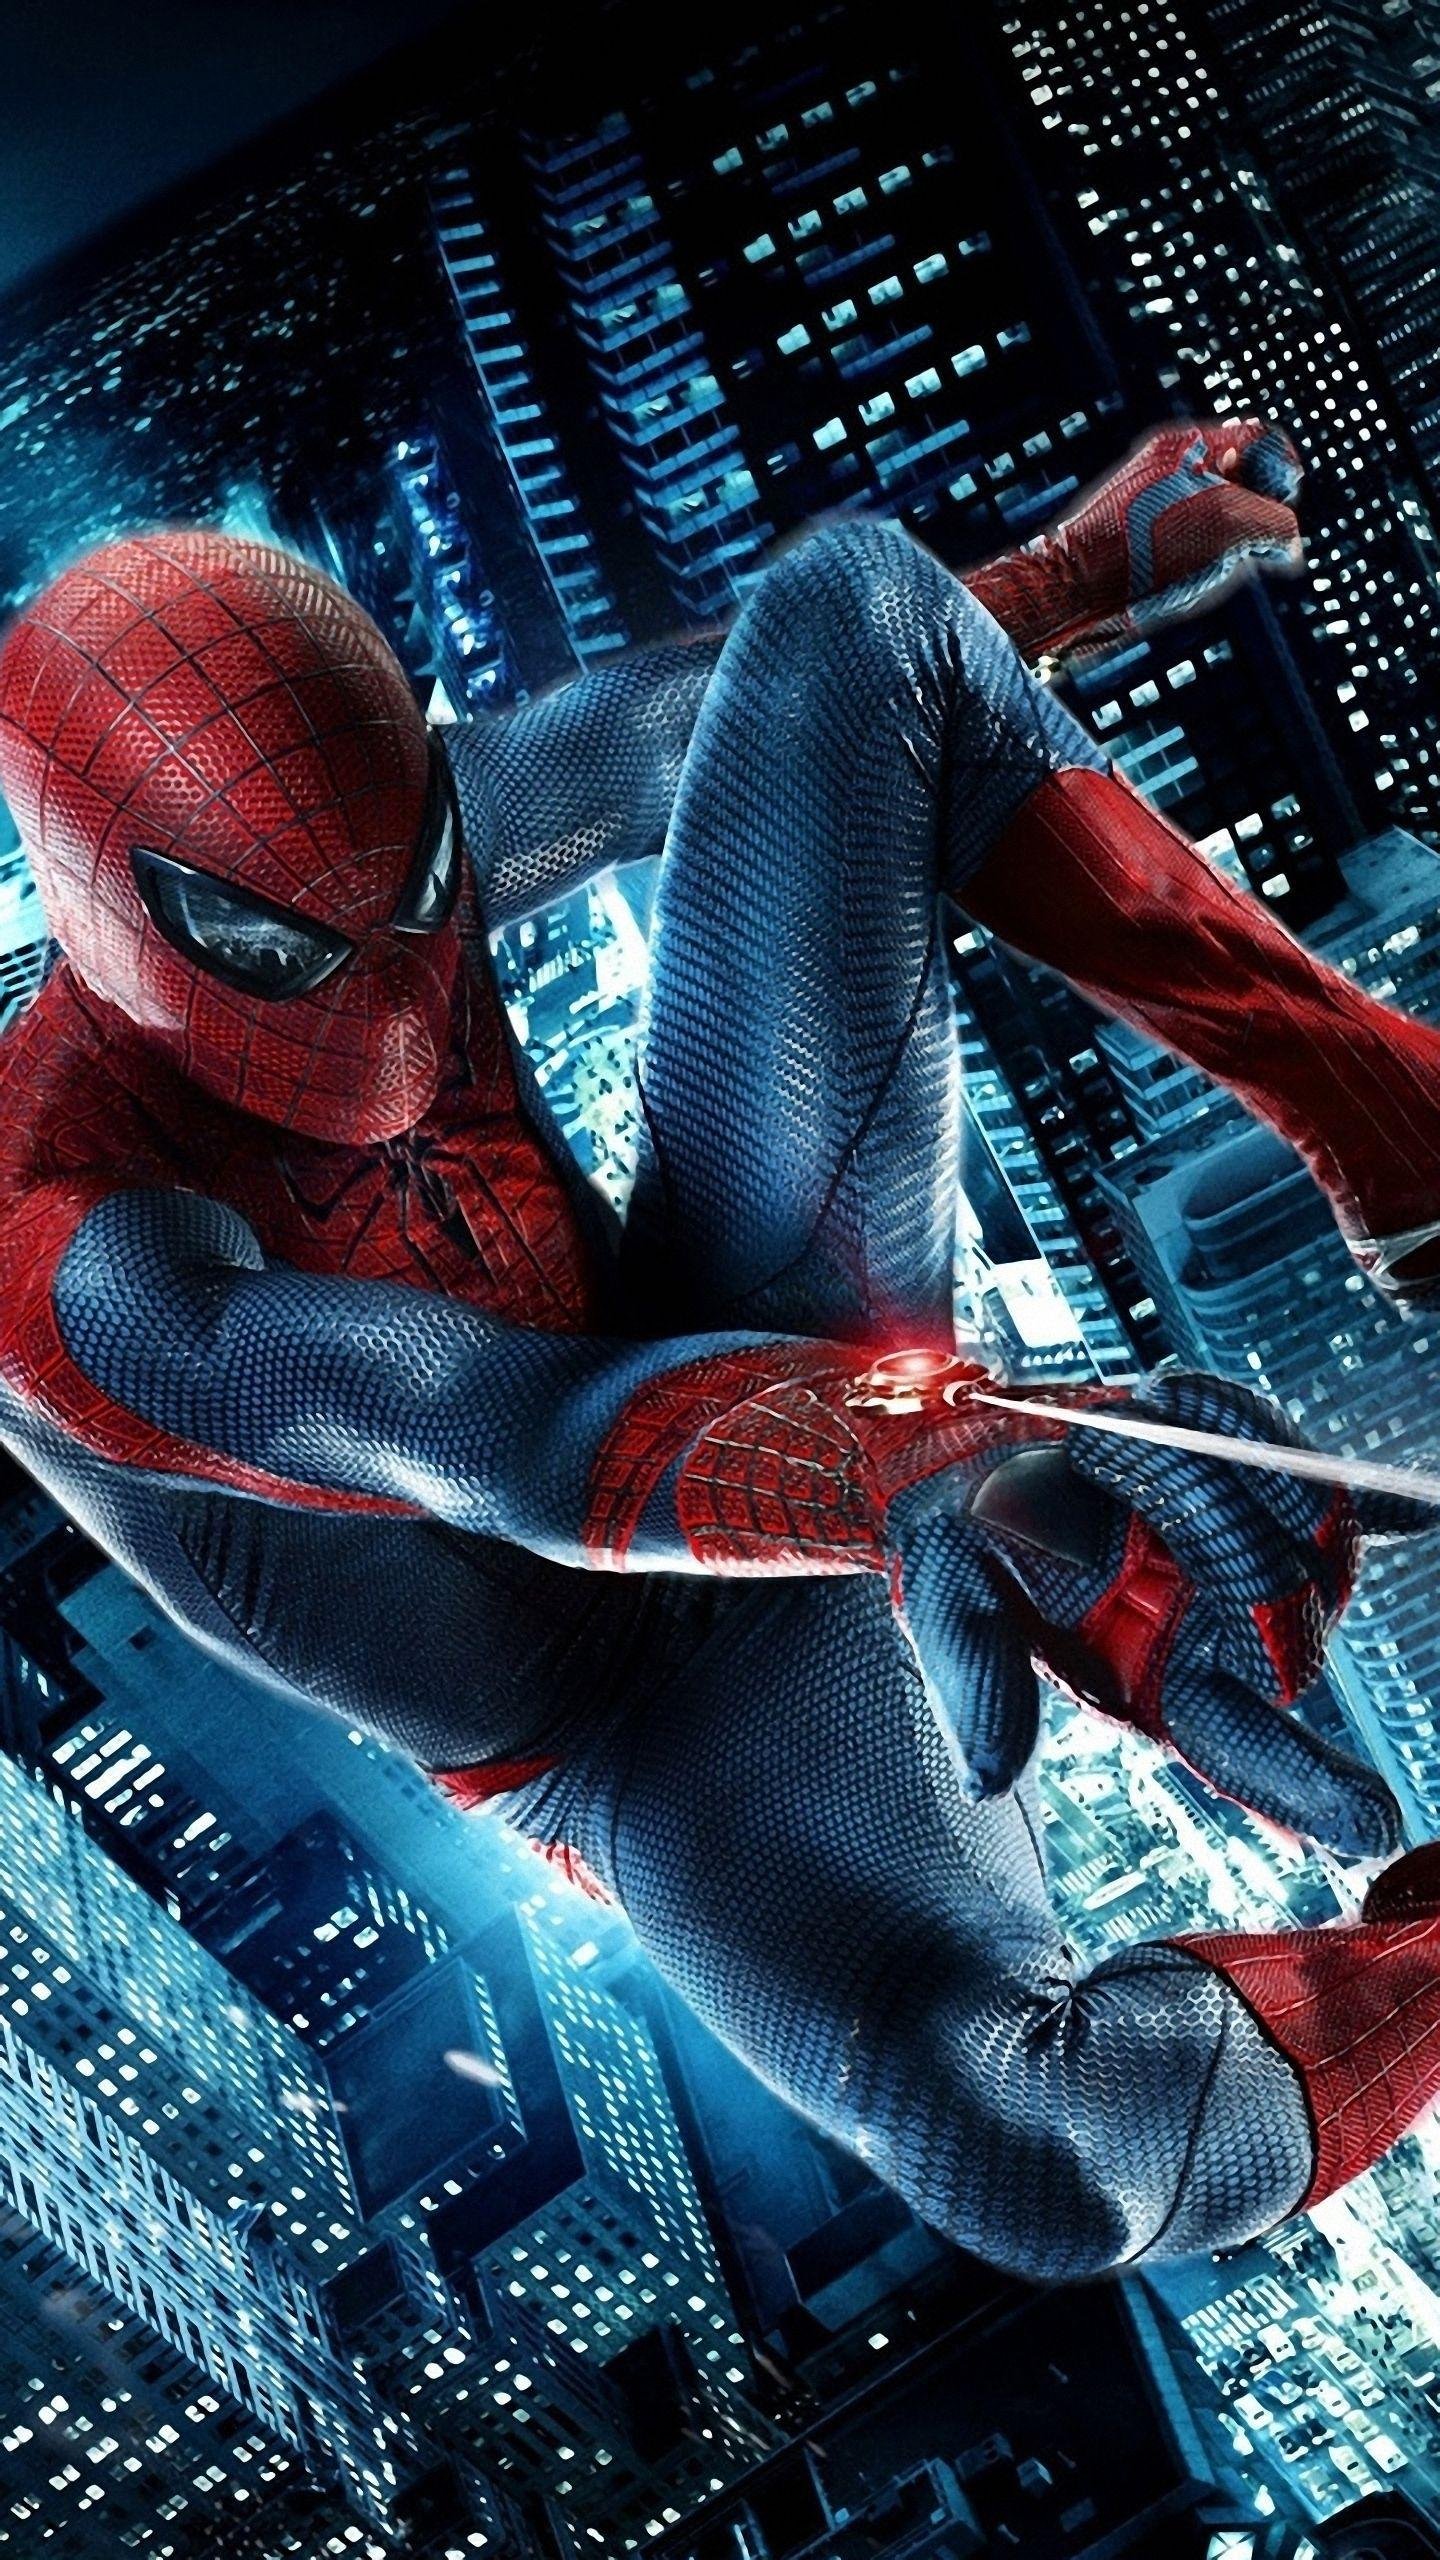 The amazing spider man Wallpapers Download